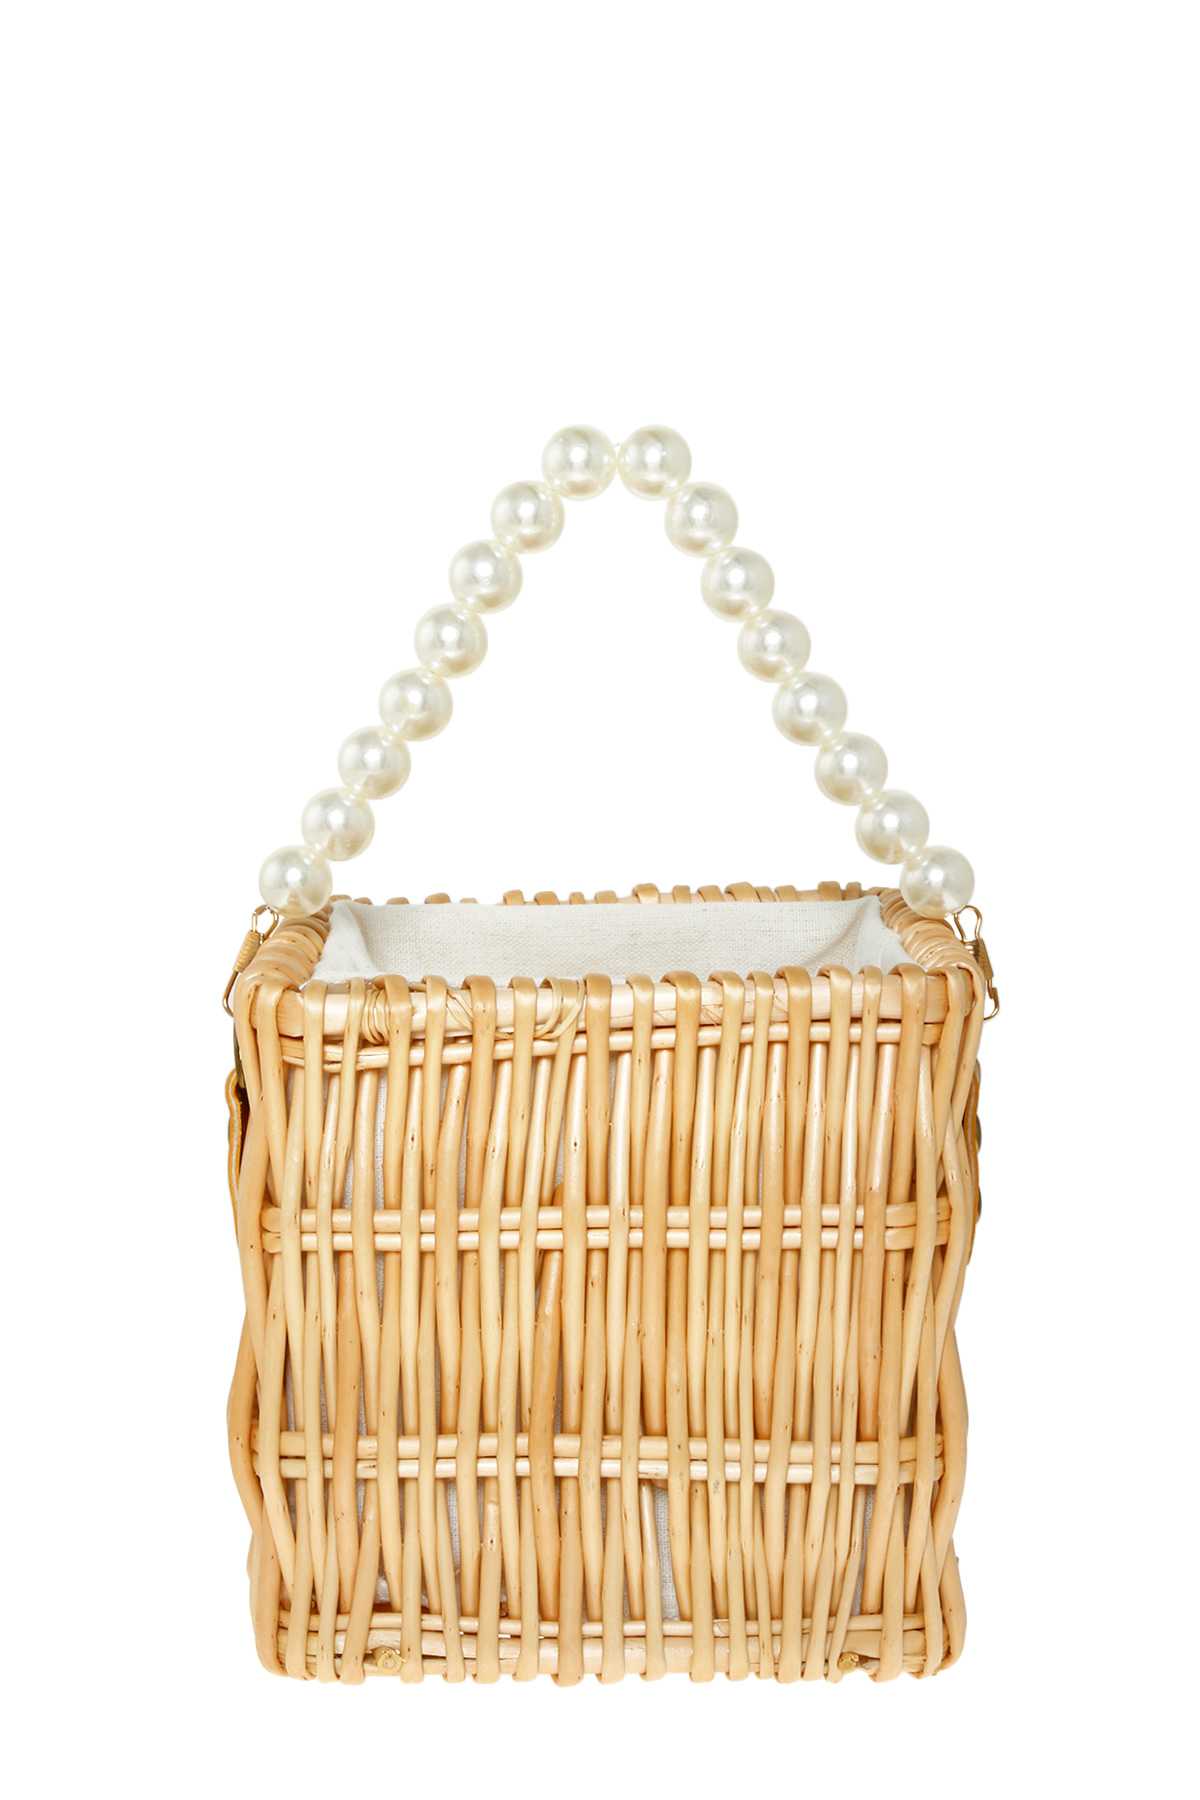 WOODEN BUCKET SHAPE BAG WITH PEARL HANDLE